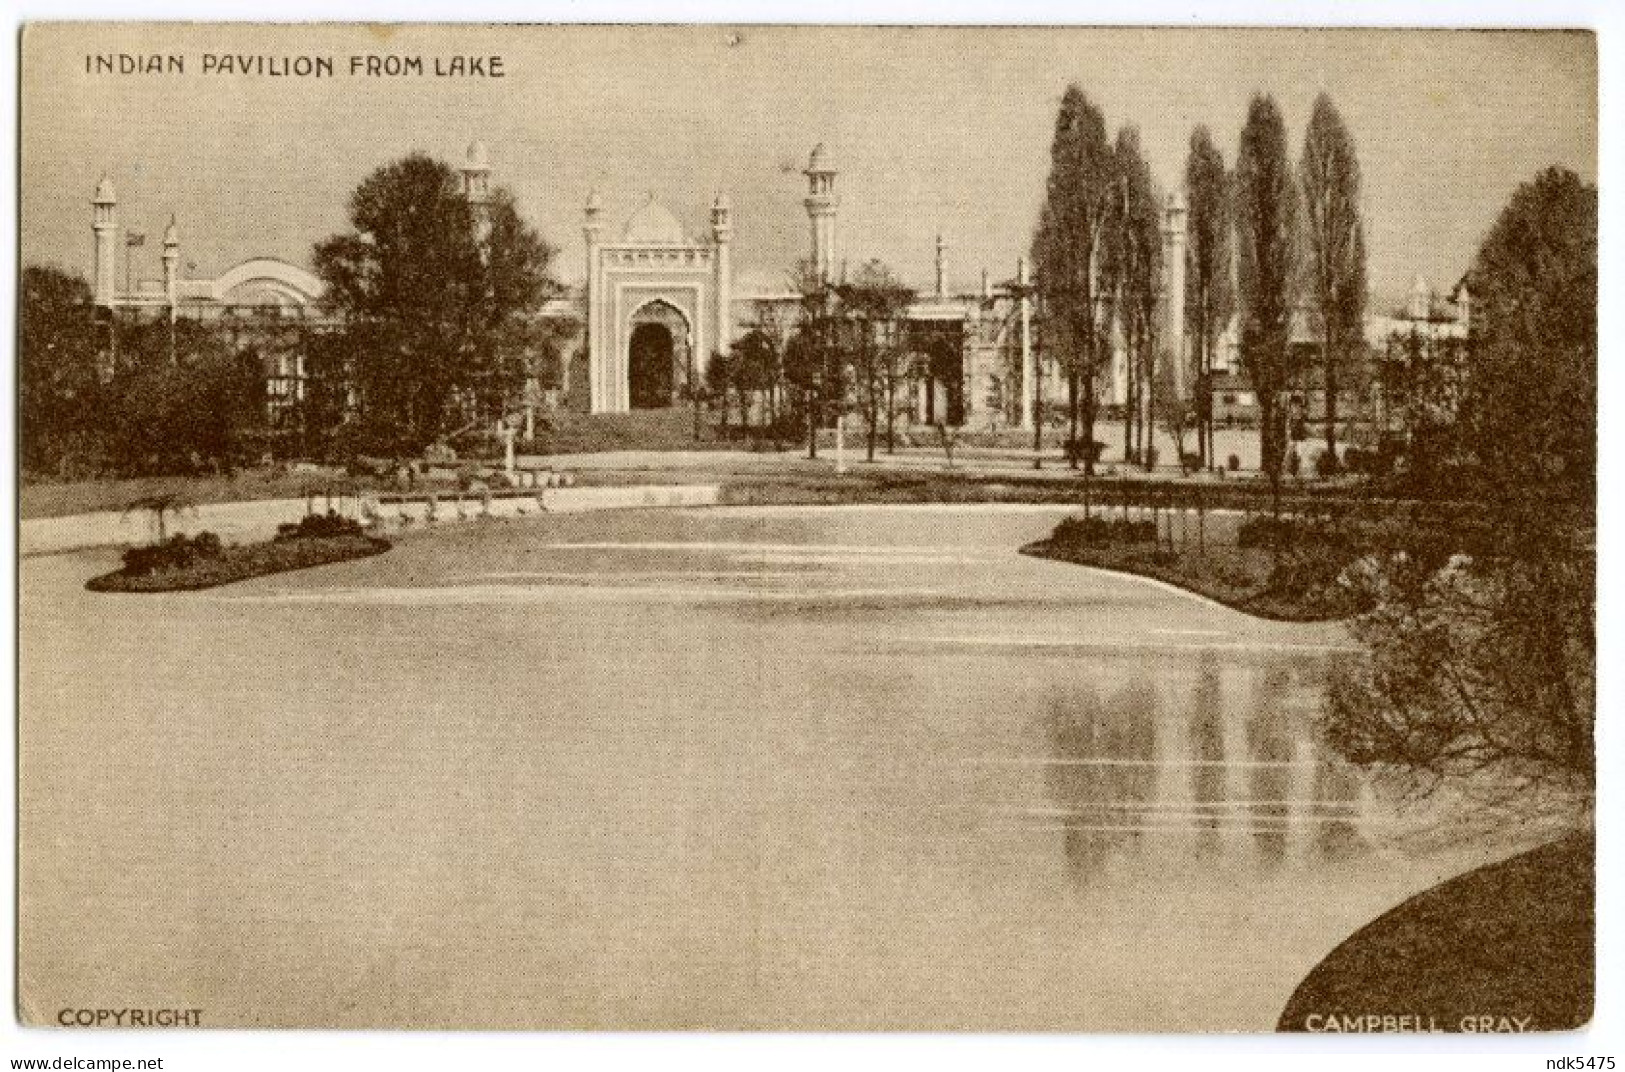 BRITISH EMPIRE EXHIBITION 1924 - INDIAN PAVILION FROM LAKE / LONDON, HYDE PARK CORNER, ALEXANDRA HOTEL - Expositions